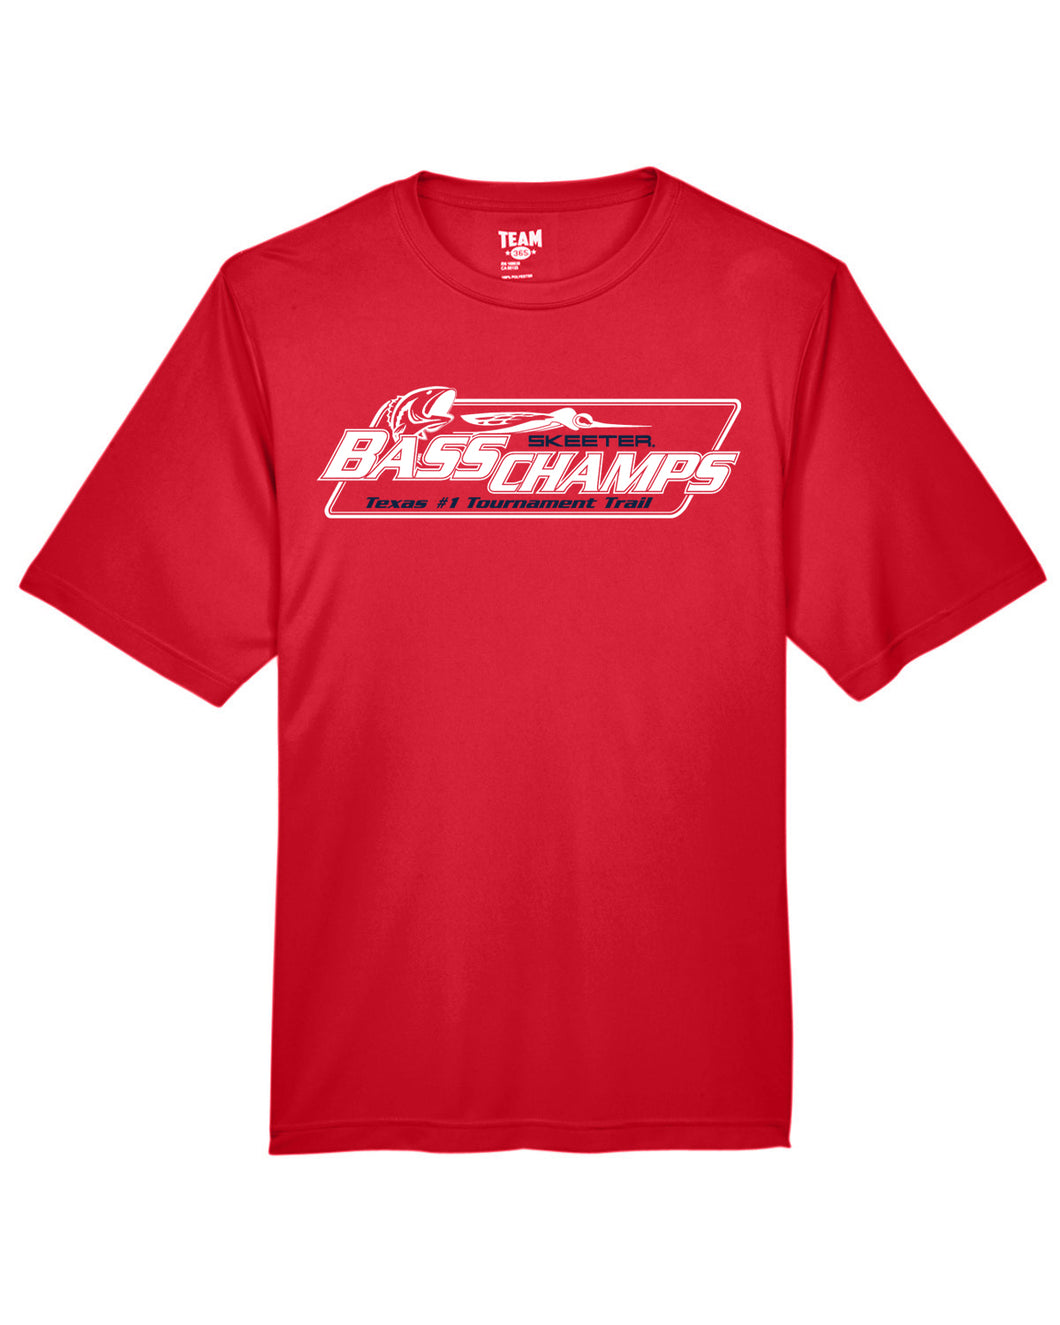 PERFORMANCE Bass Champs Logo Tee Moisture Wicking Cool Fabric in 5 Colors